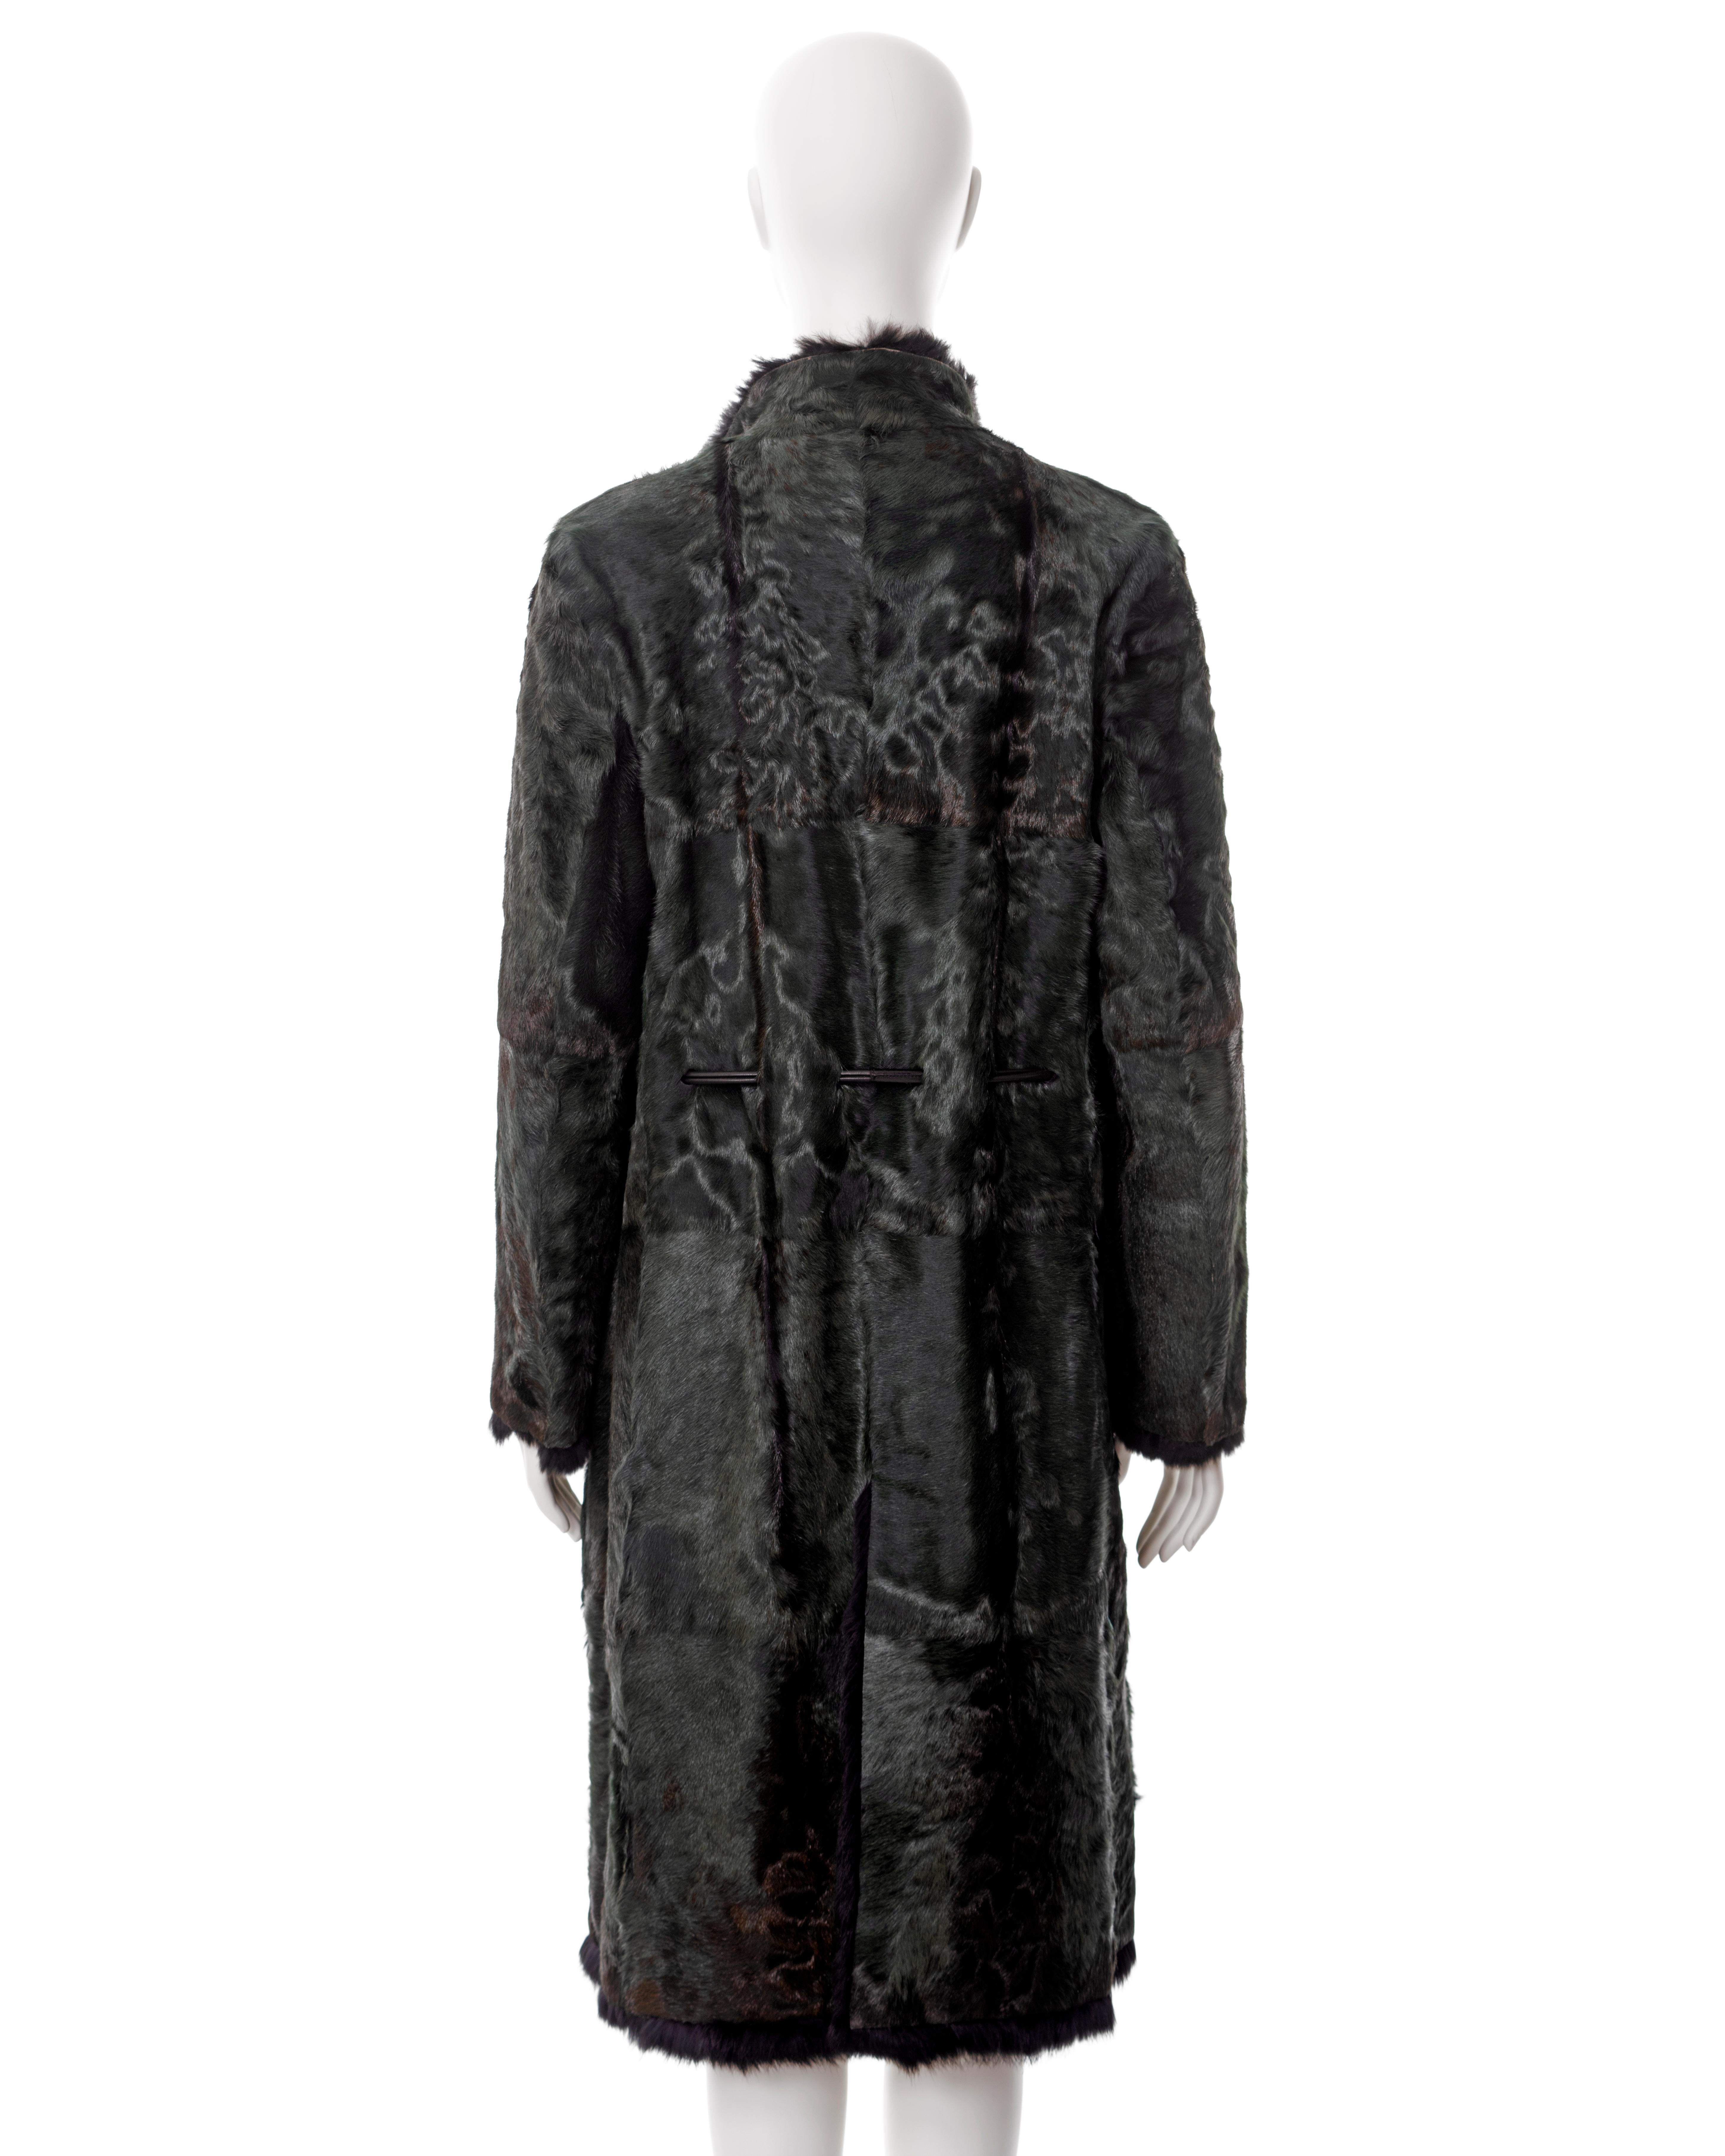 Gucci by Tom Ford reversible green and black fur coat, fw 1999 For Sale 9